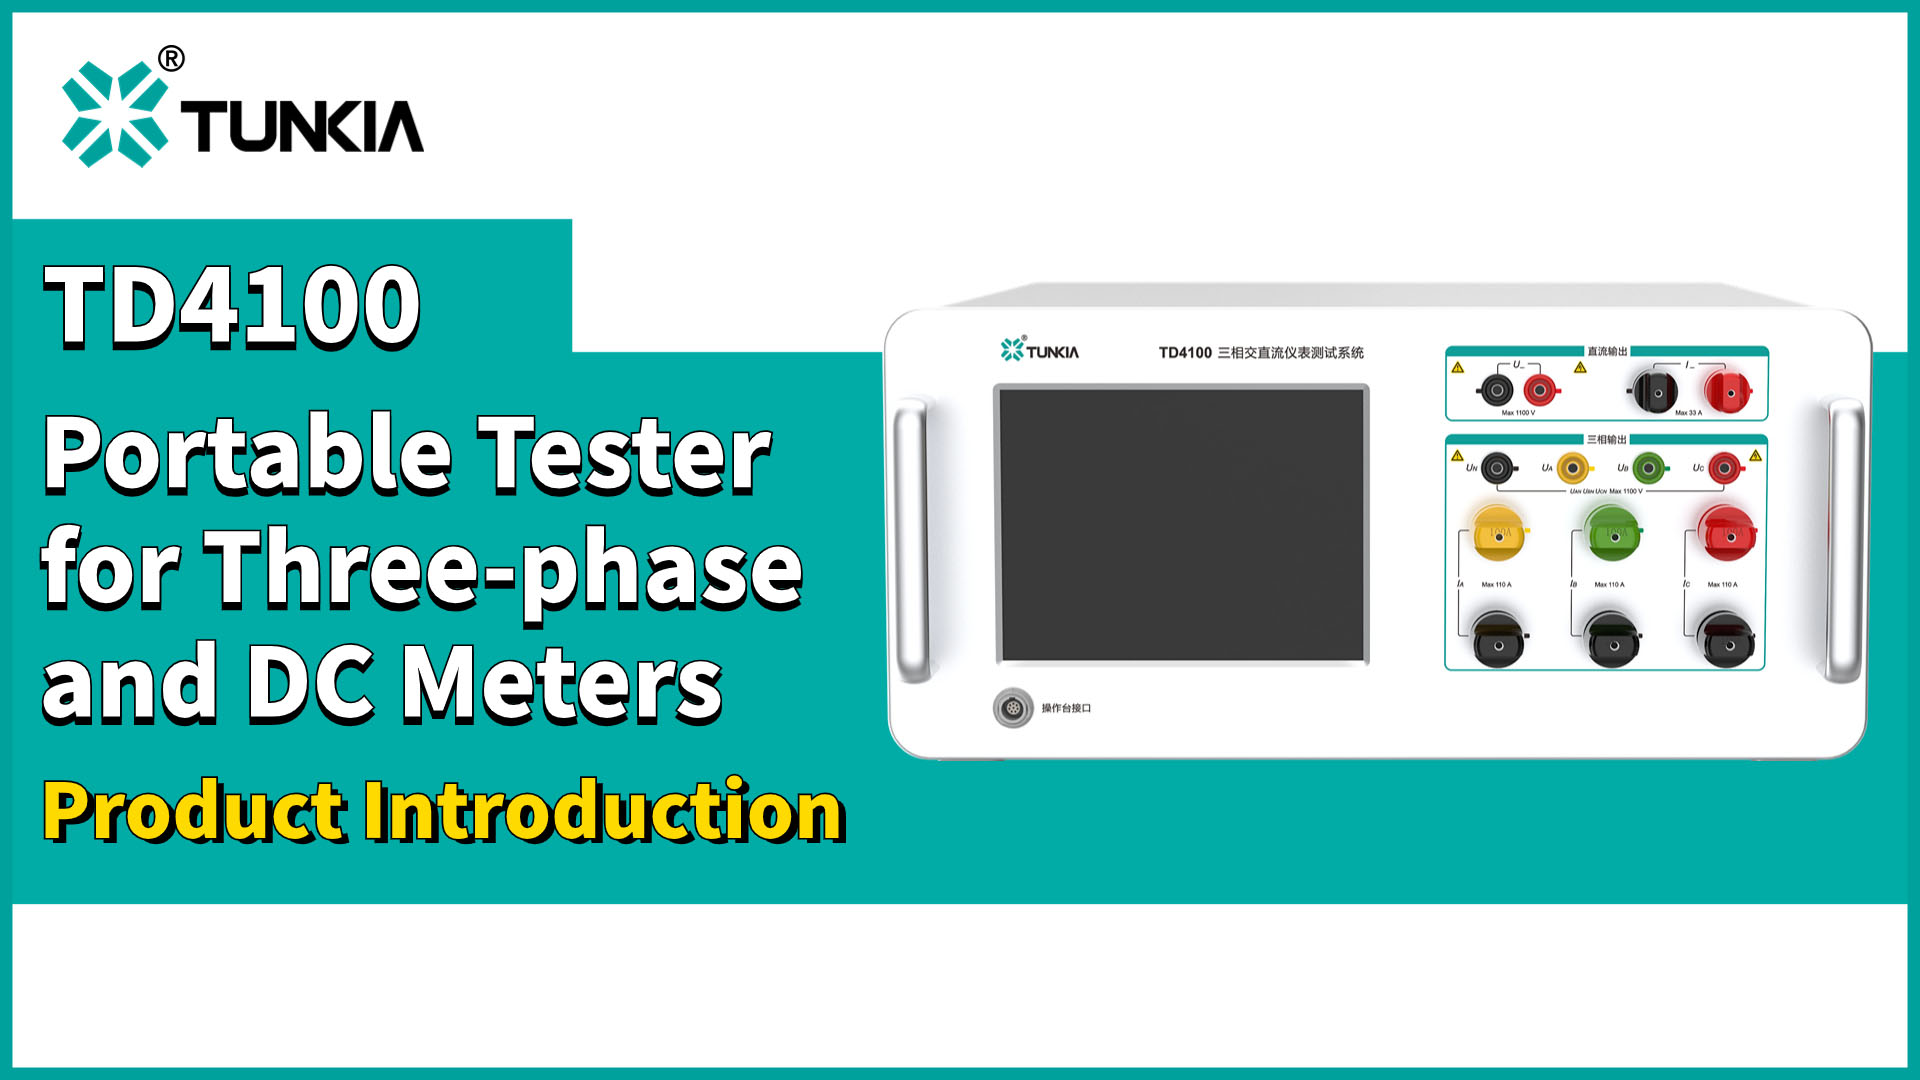 High Precision Portable Tester for Three-phase and DC Meters-TD4100 Intro